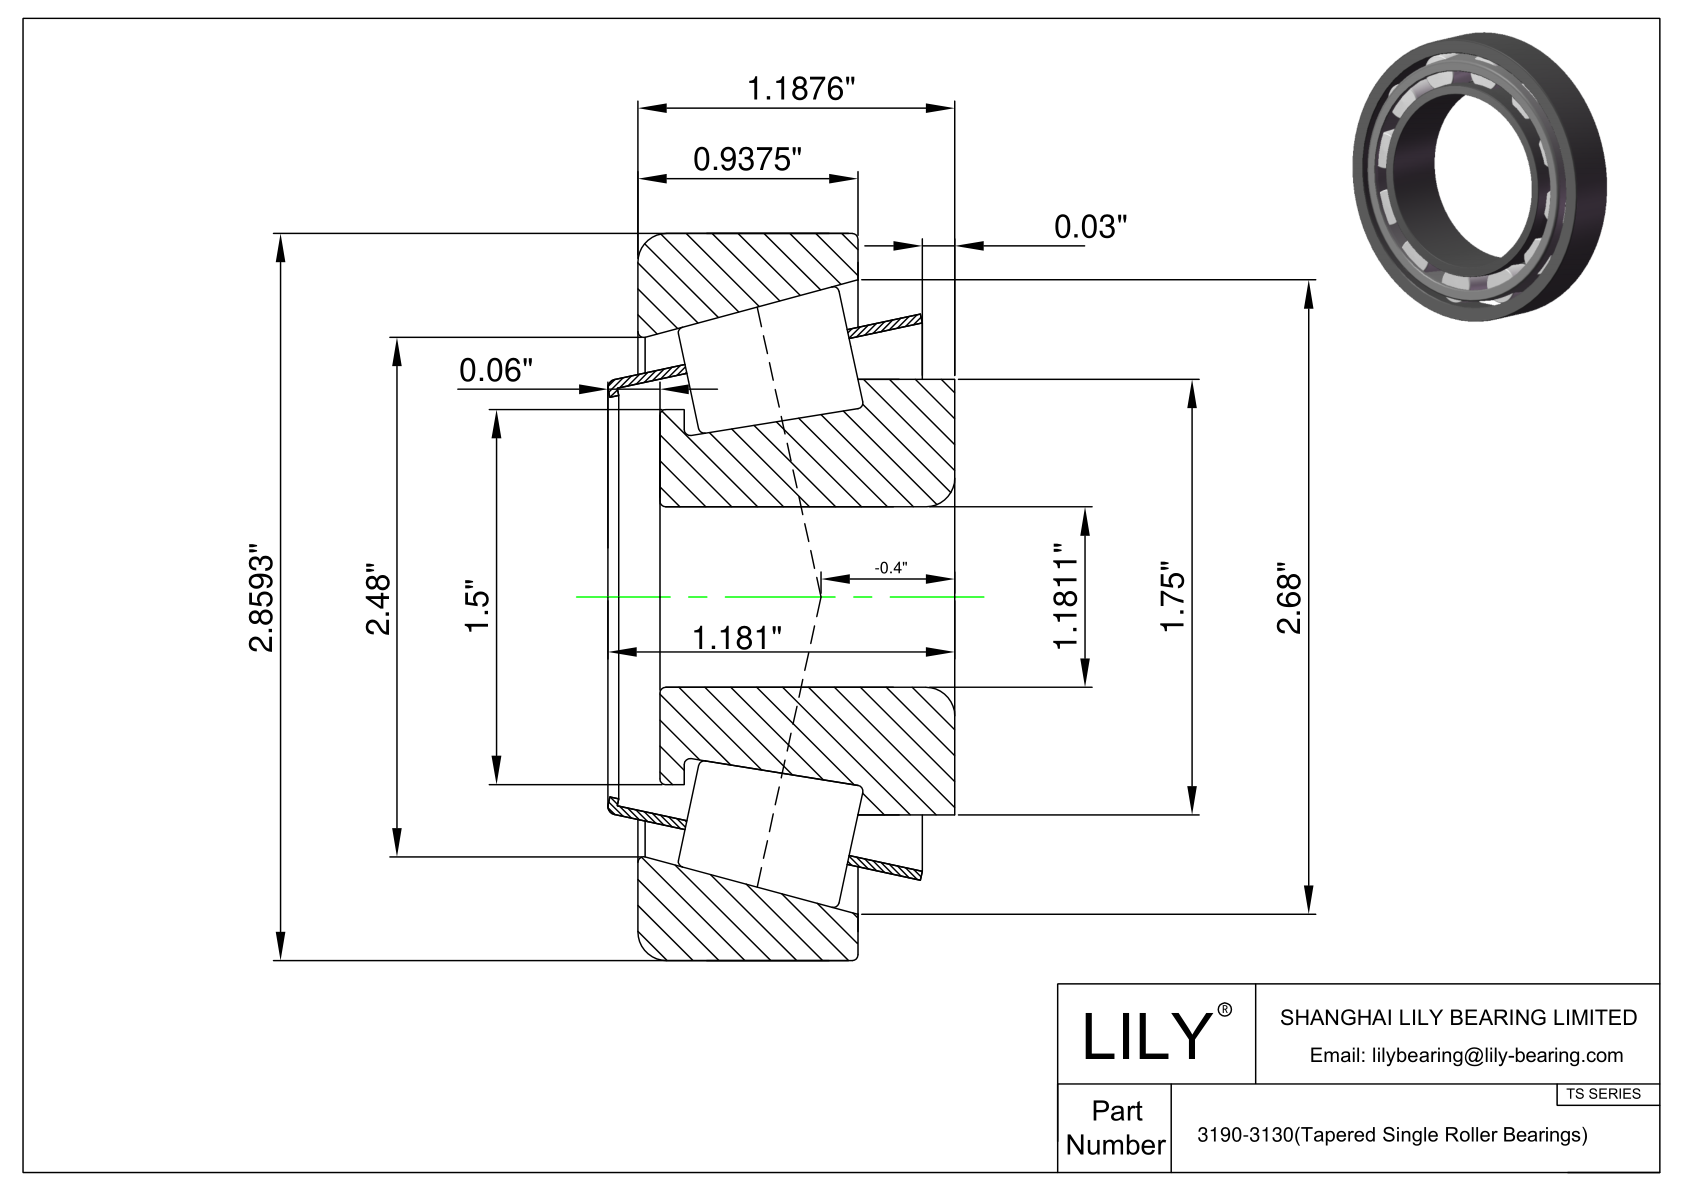 3190-3130 TS (Tapered Single Roller Bearings) (Imperial) cad drawing